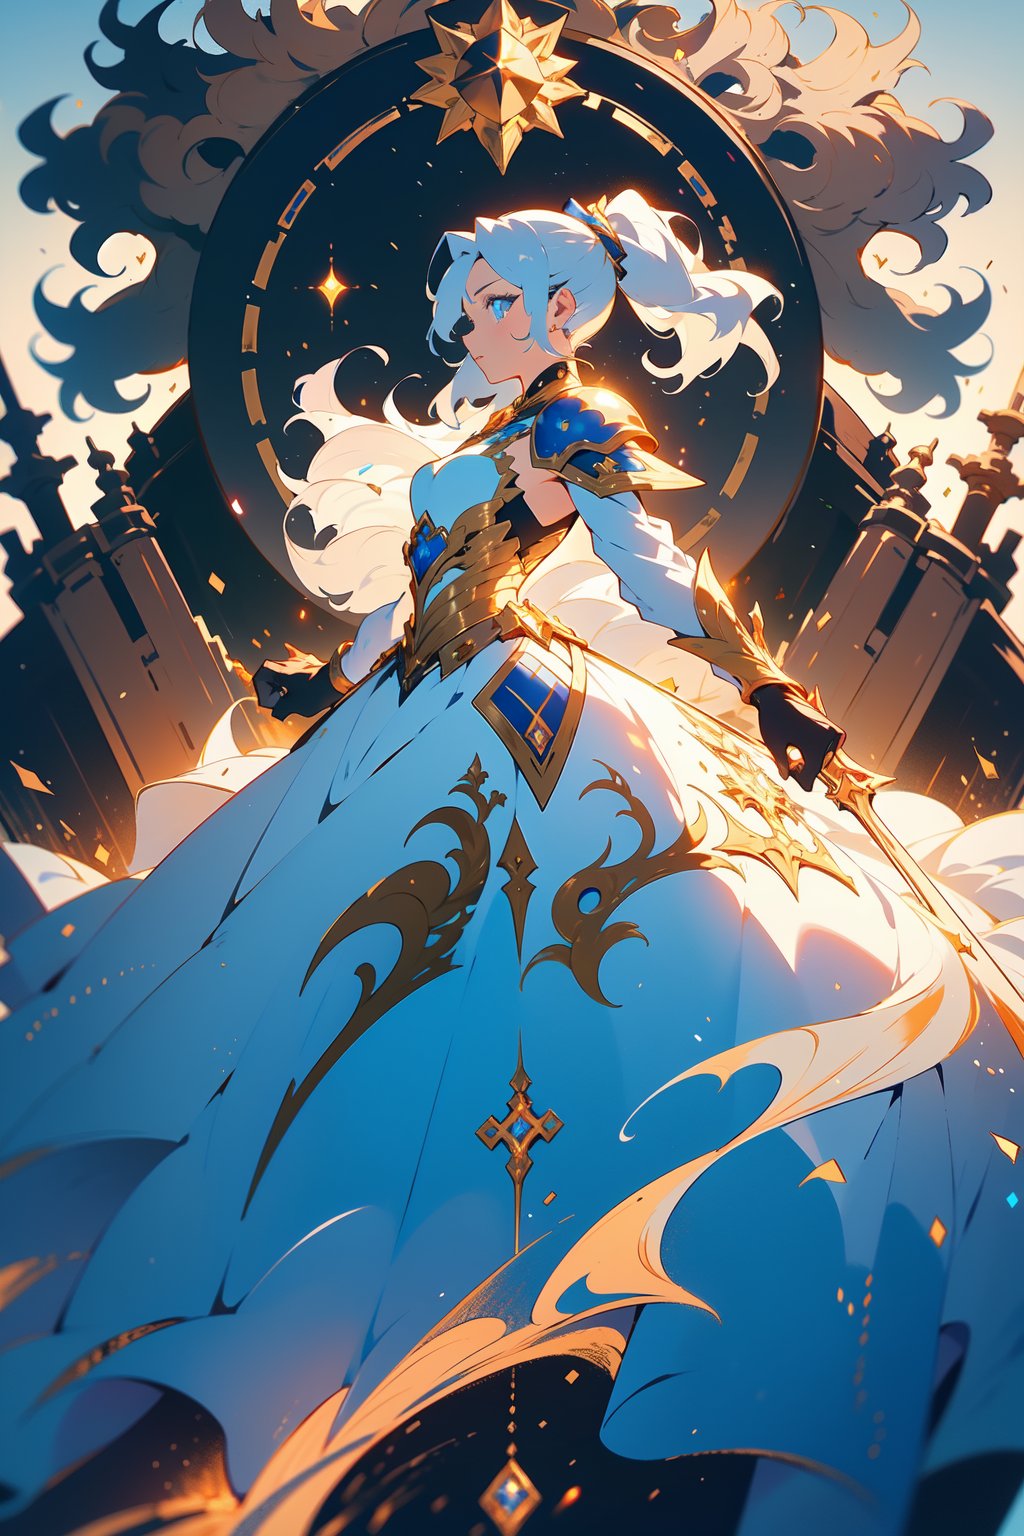 highly detailed, high quality, masterpiece, beautiful (entire plane shot), 
A girl will wear shining golden and whit lion armor. Her hair is pulled back into a blonde ponytail and her eyes are a beautiful light blue shade. She wields  shield and sword,wrenchfaeflare